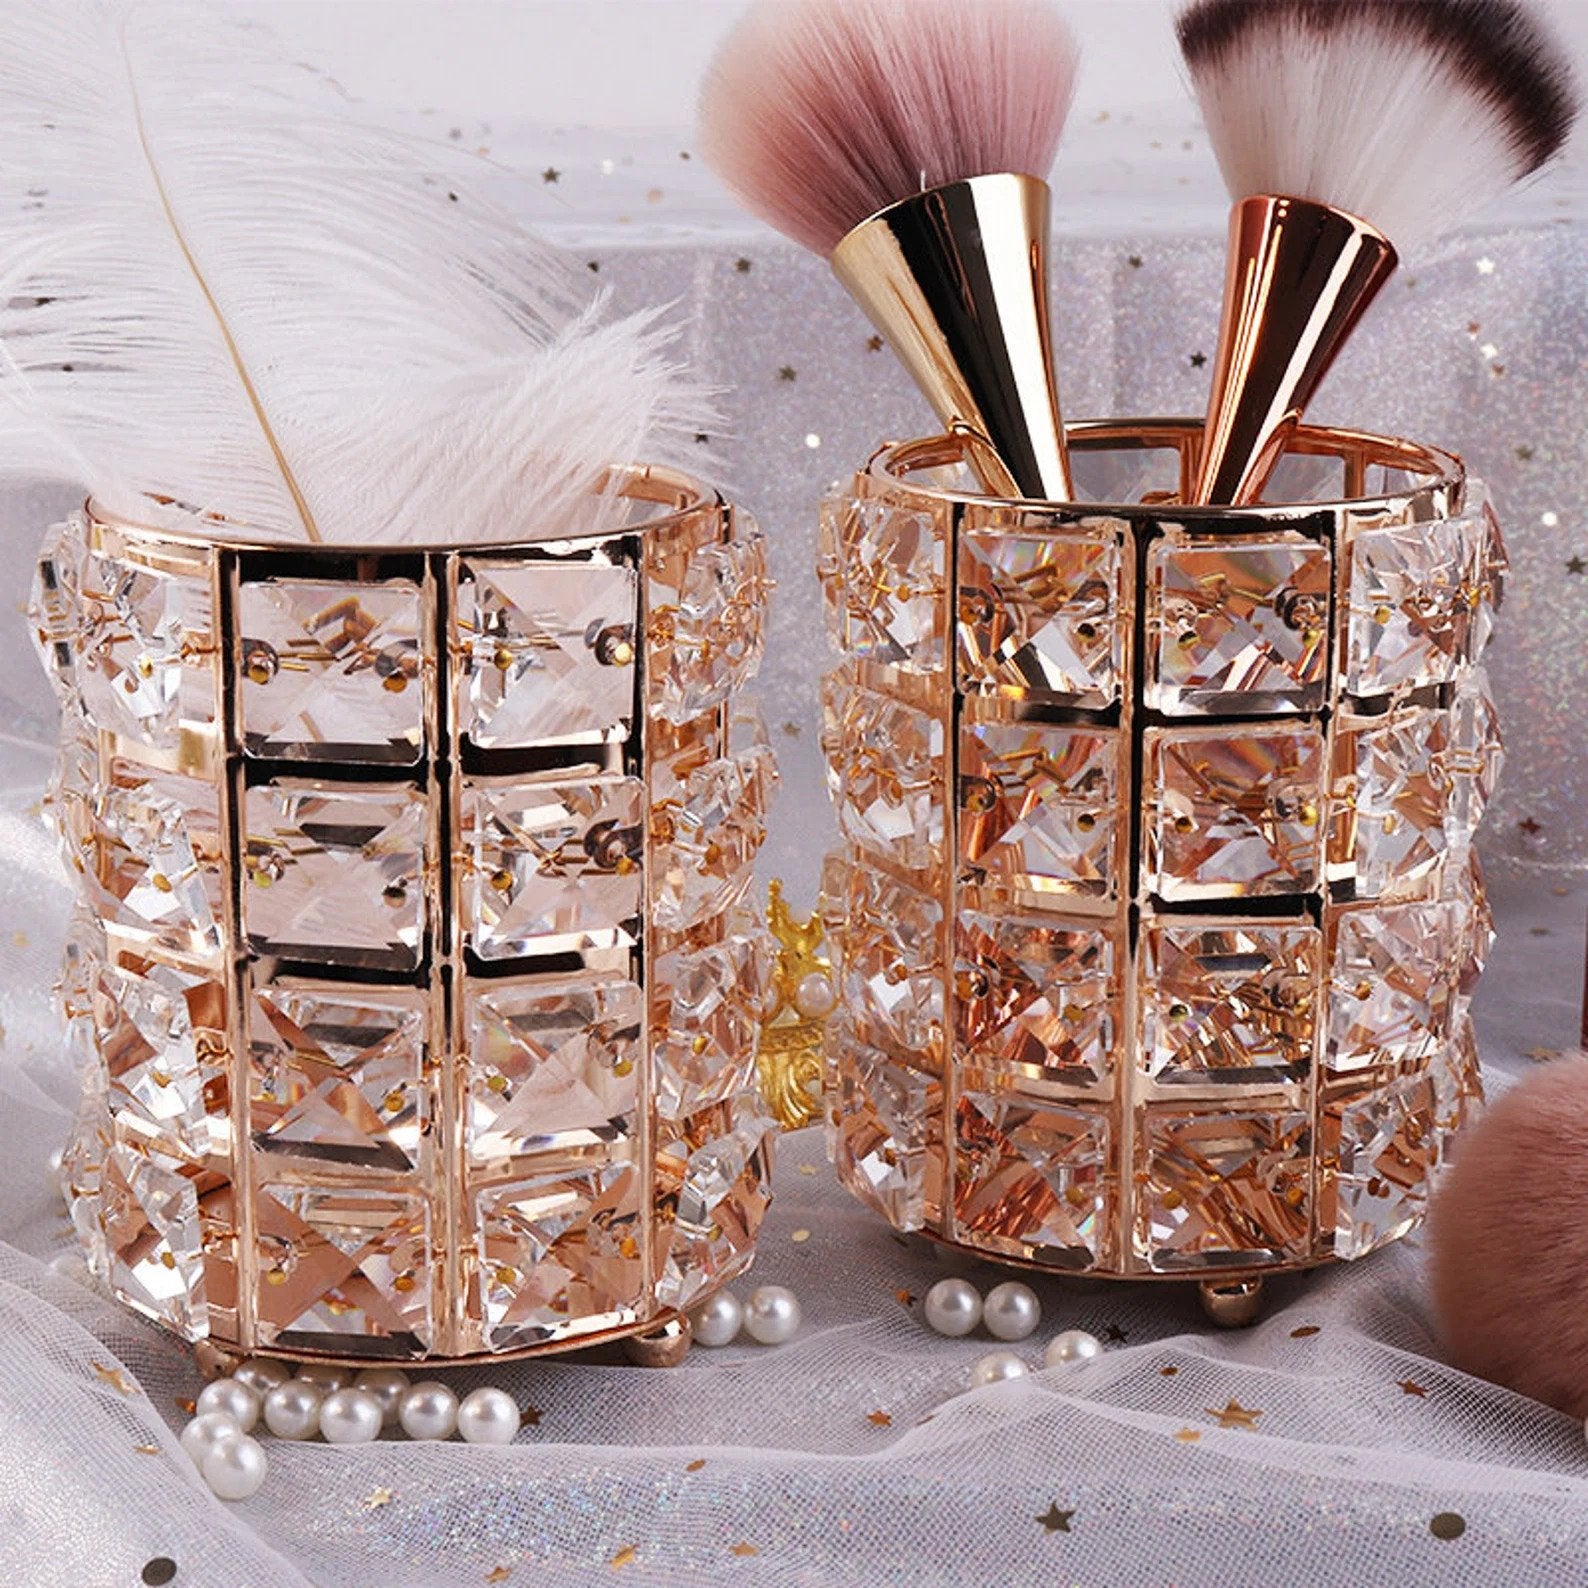 Two pink crystal pencil cups with gold metal square in between. The cups are holding make up brushes